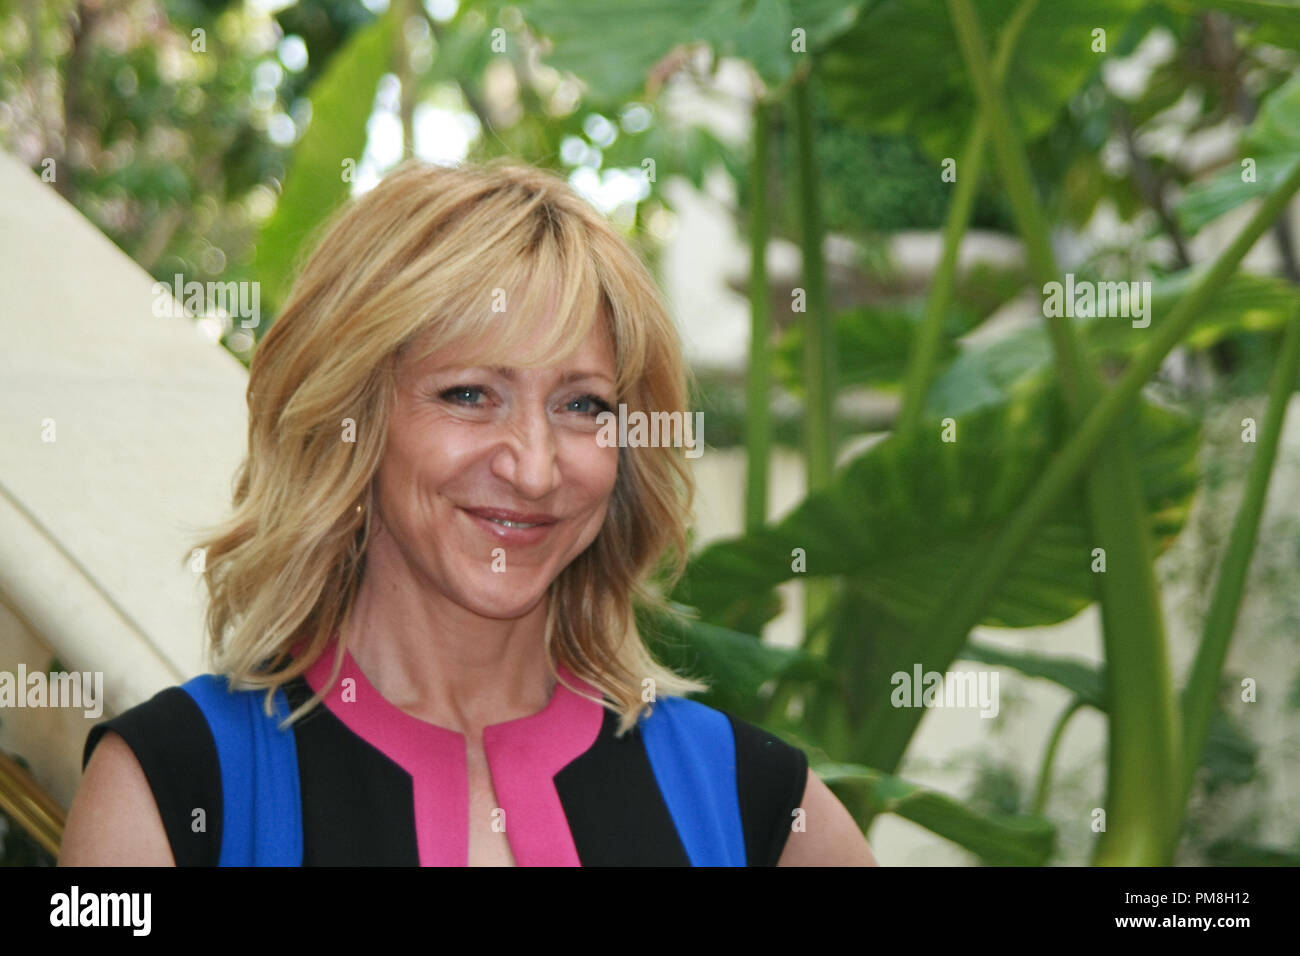 Edie Falco 'Nurse Jackie'  Portrait Session, April 5, 2012.  Reproduction by American tabloids is absolutely forbidden. File Reference # 31494 007JRC  For Editorial Use Only -  All Rights Reserved Stock Photo